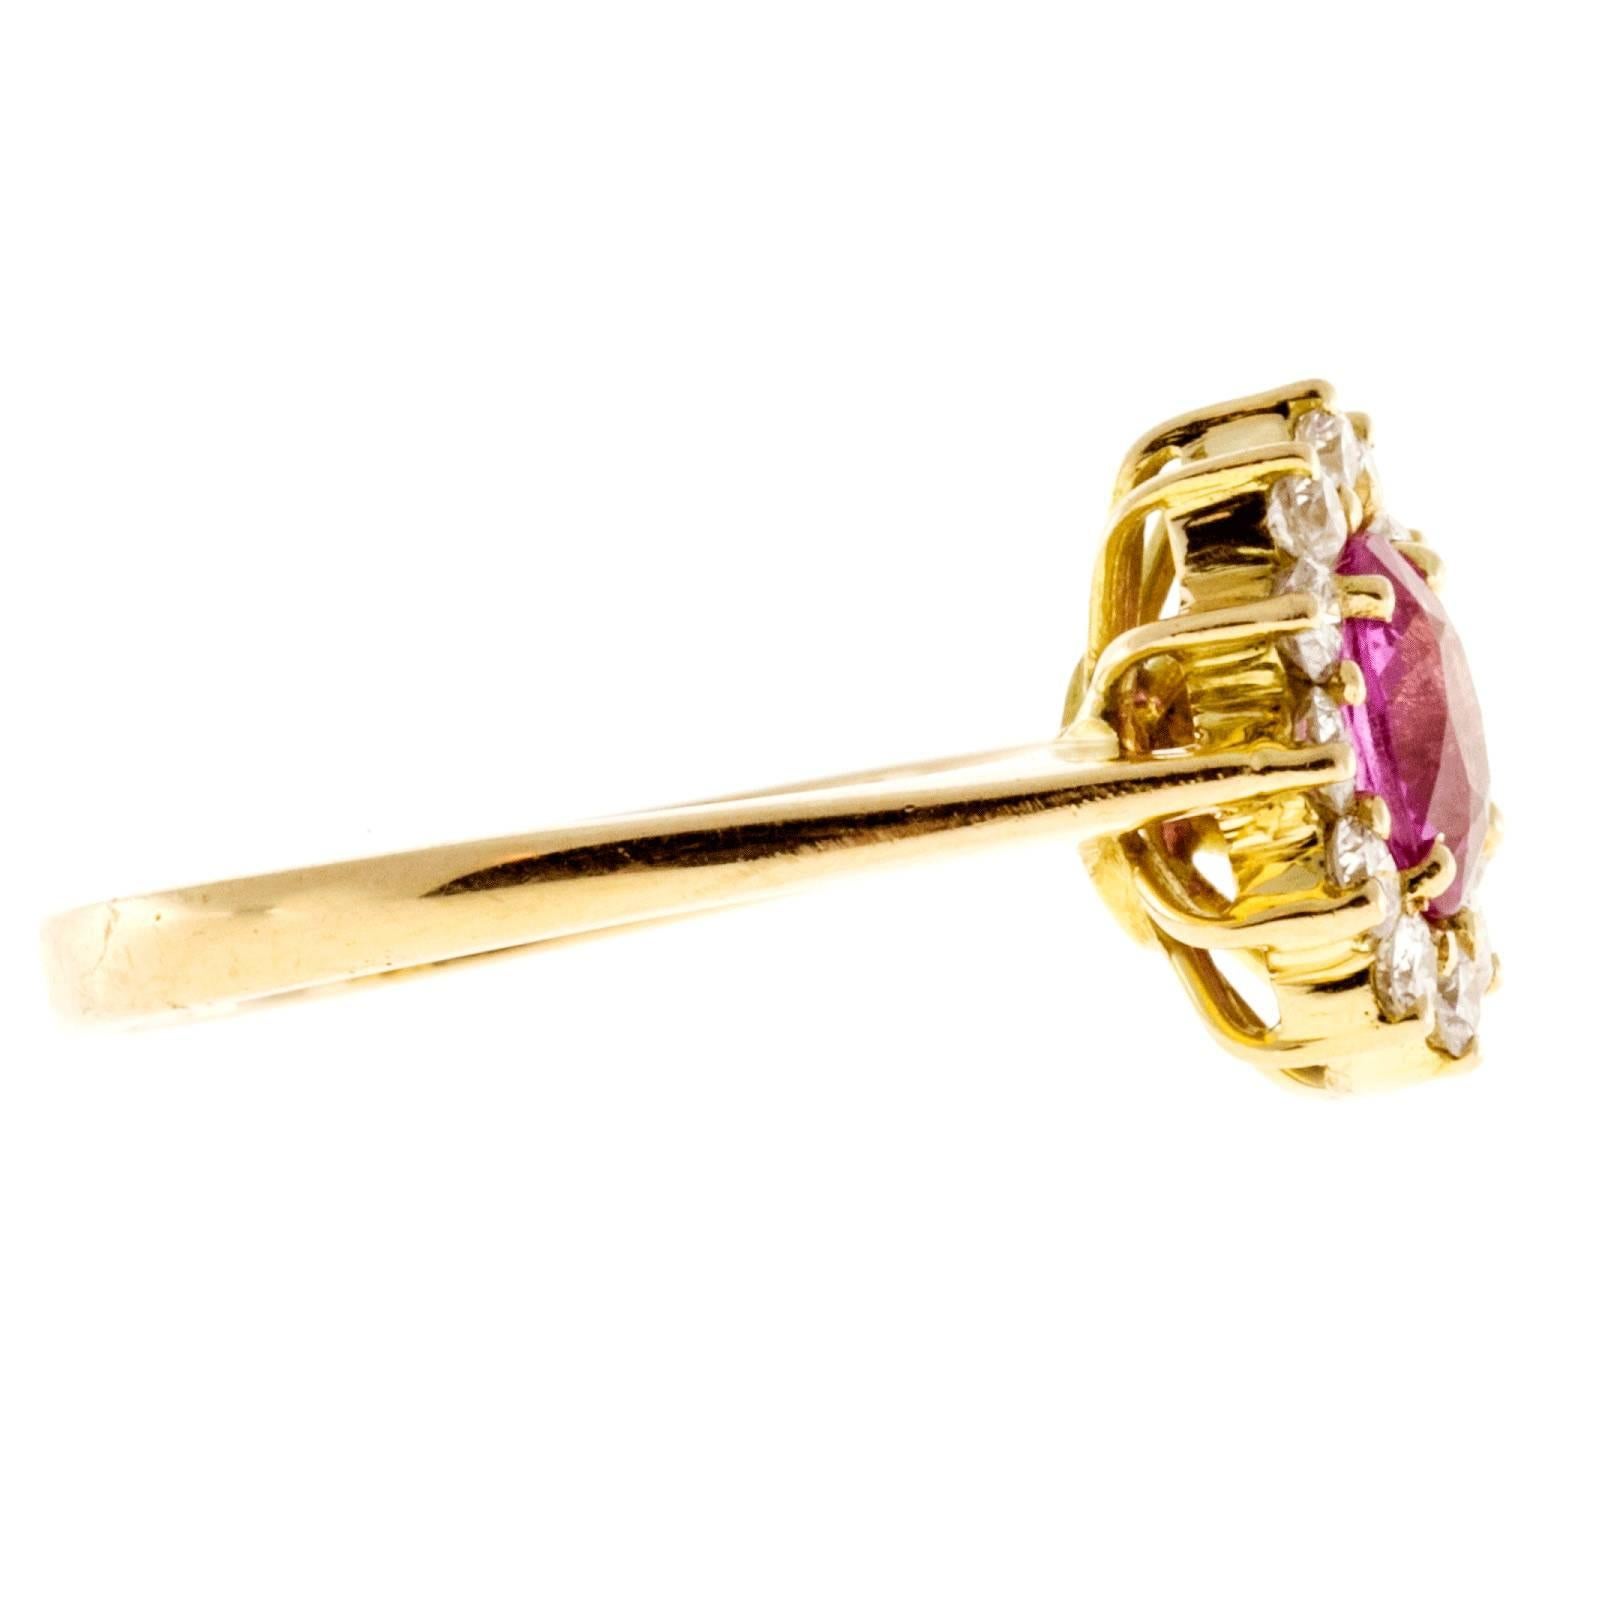 Vintage 1960 GIA certified natural no heat fine gem pink Sapphire surrounded by very bright full cut white diamond halo in a 18k yellow gold setting.

1 oval bright pink Sapphire, approx. total weight .75cts, VS2, 6.98 x 5.26 x 3.35mm, GIA